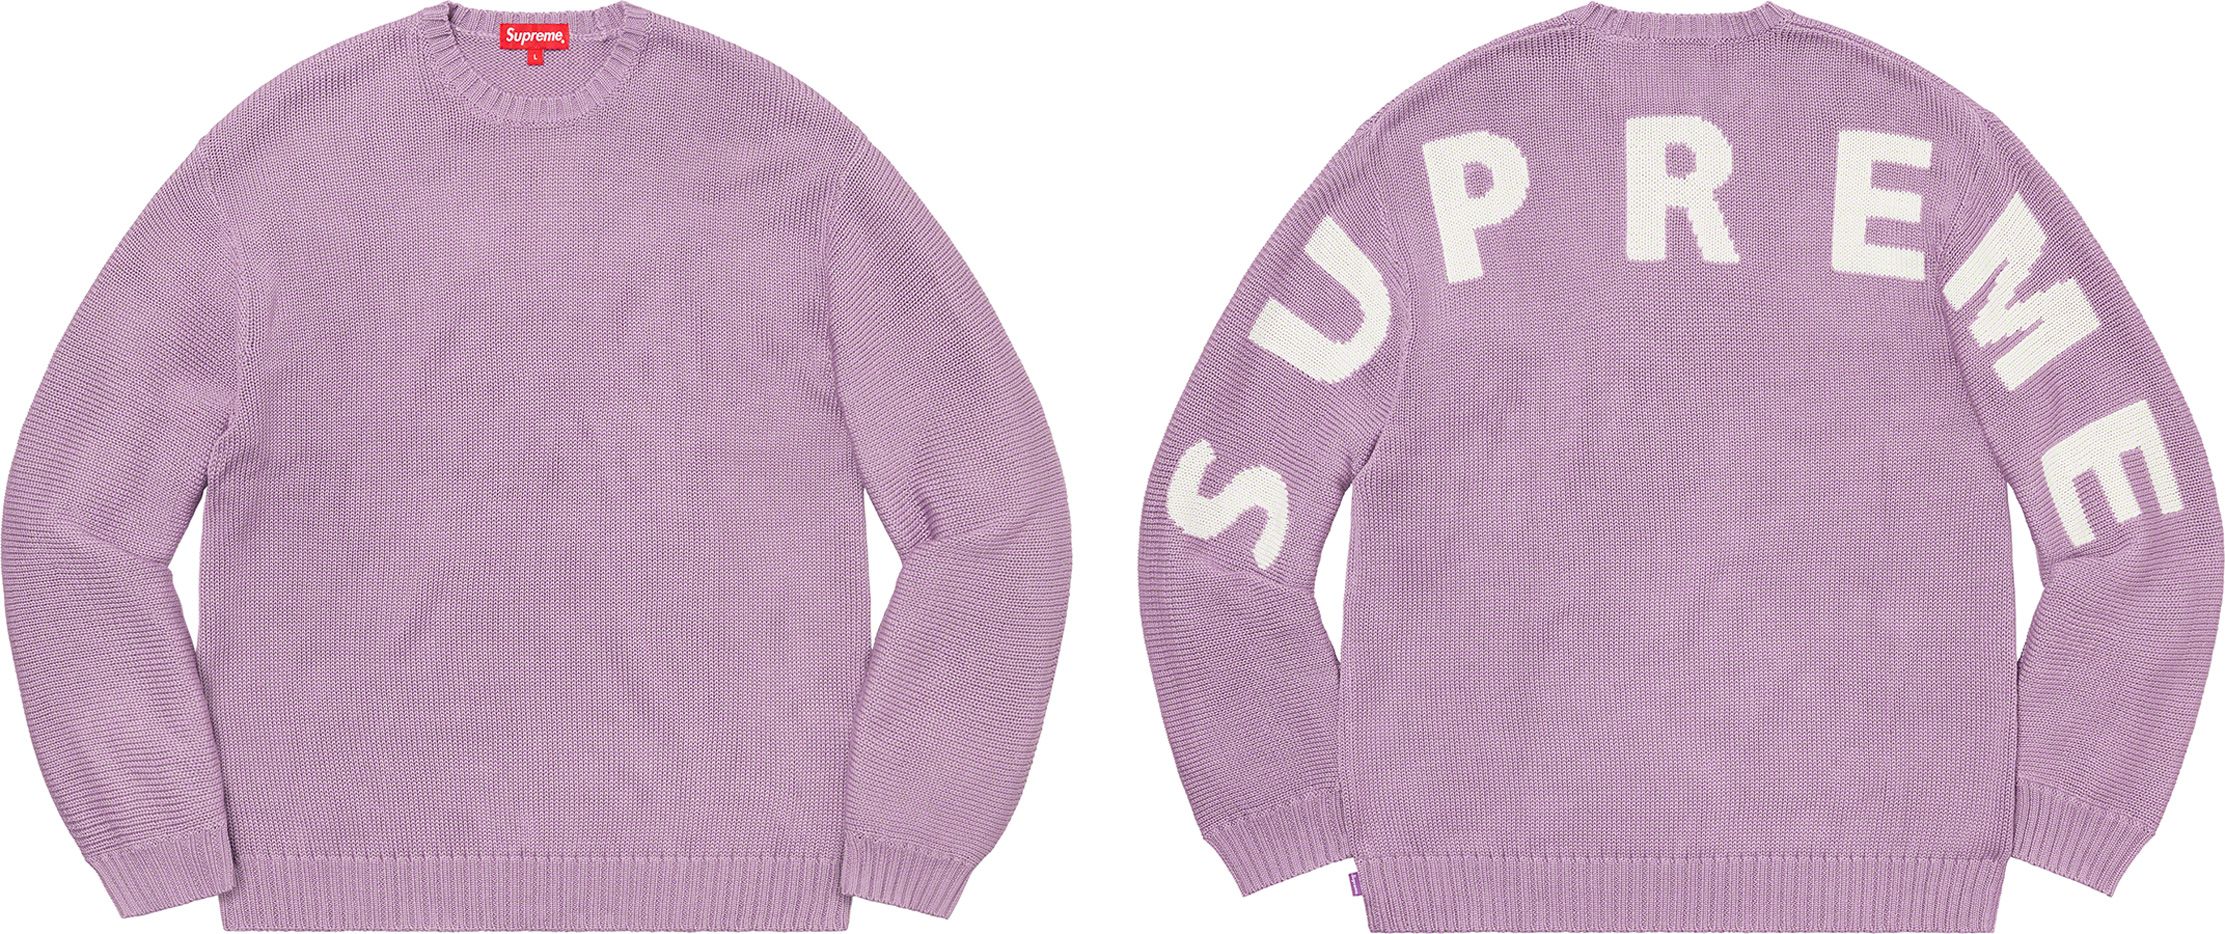 Stars Zip Up Sweater Polo - Spring/Summer 2020 Preview – Supreme